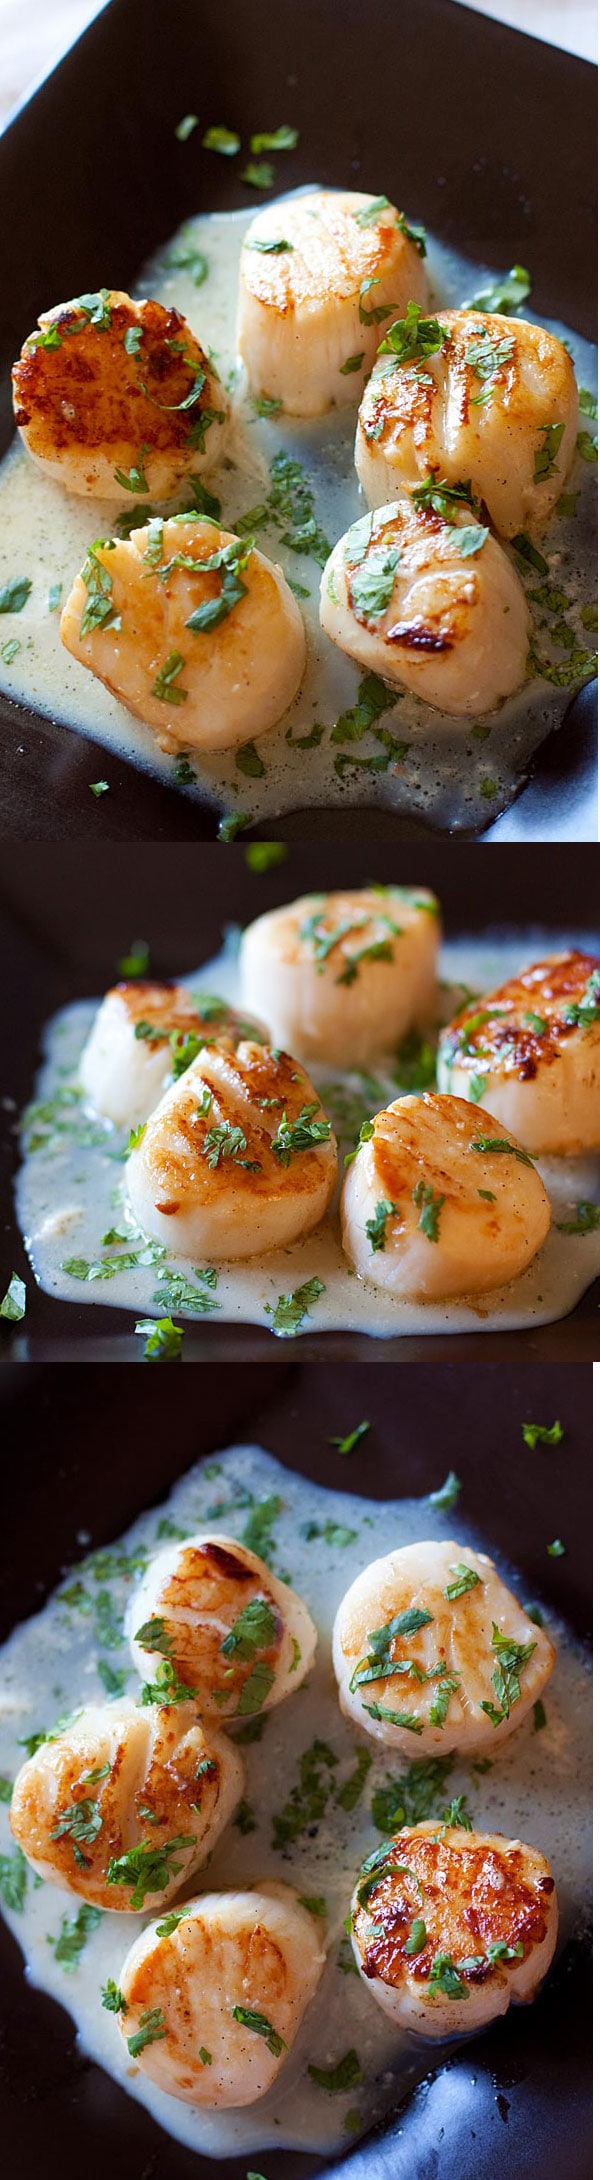 Garlic Herb Seared Scallops - Easy scallops recipe with a cream sauce infused with garlic and herb. So good and restaurant-quality! | rasamalaysia.com